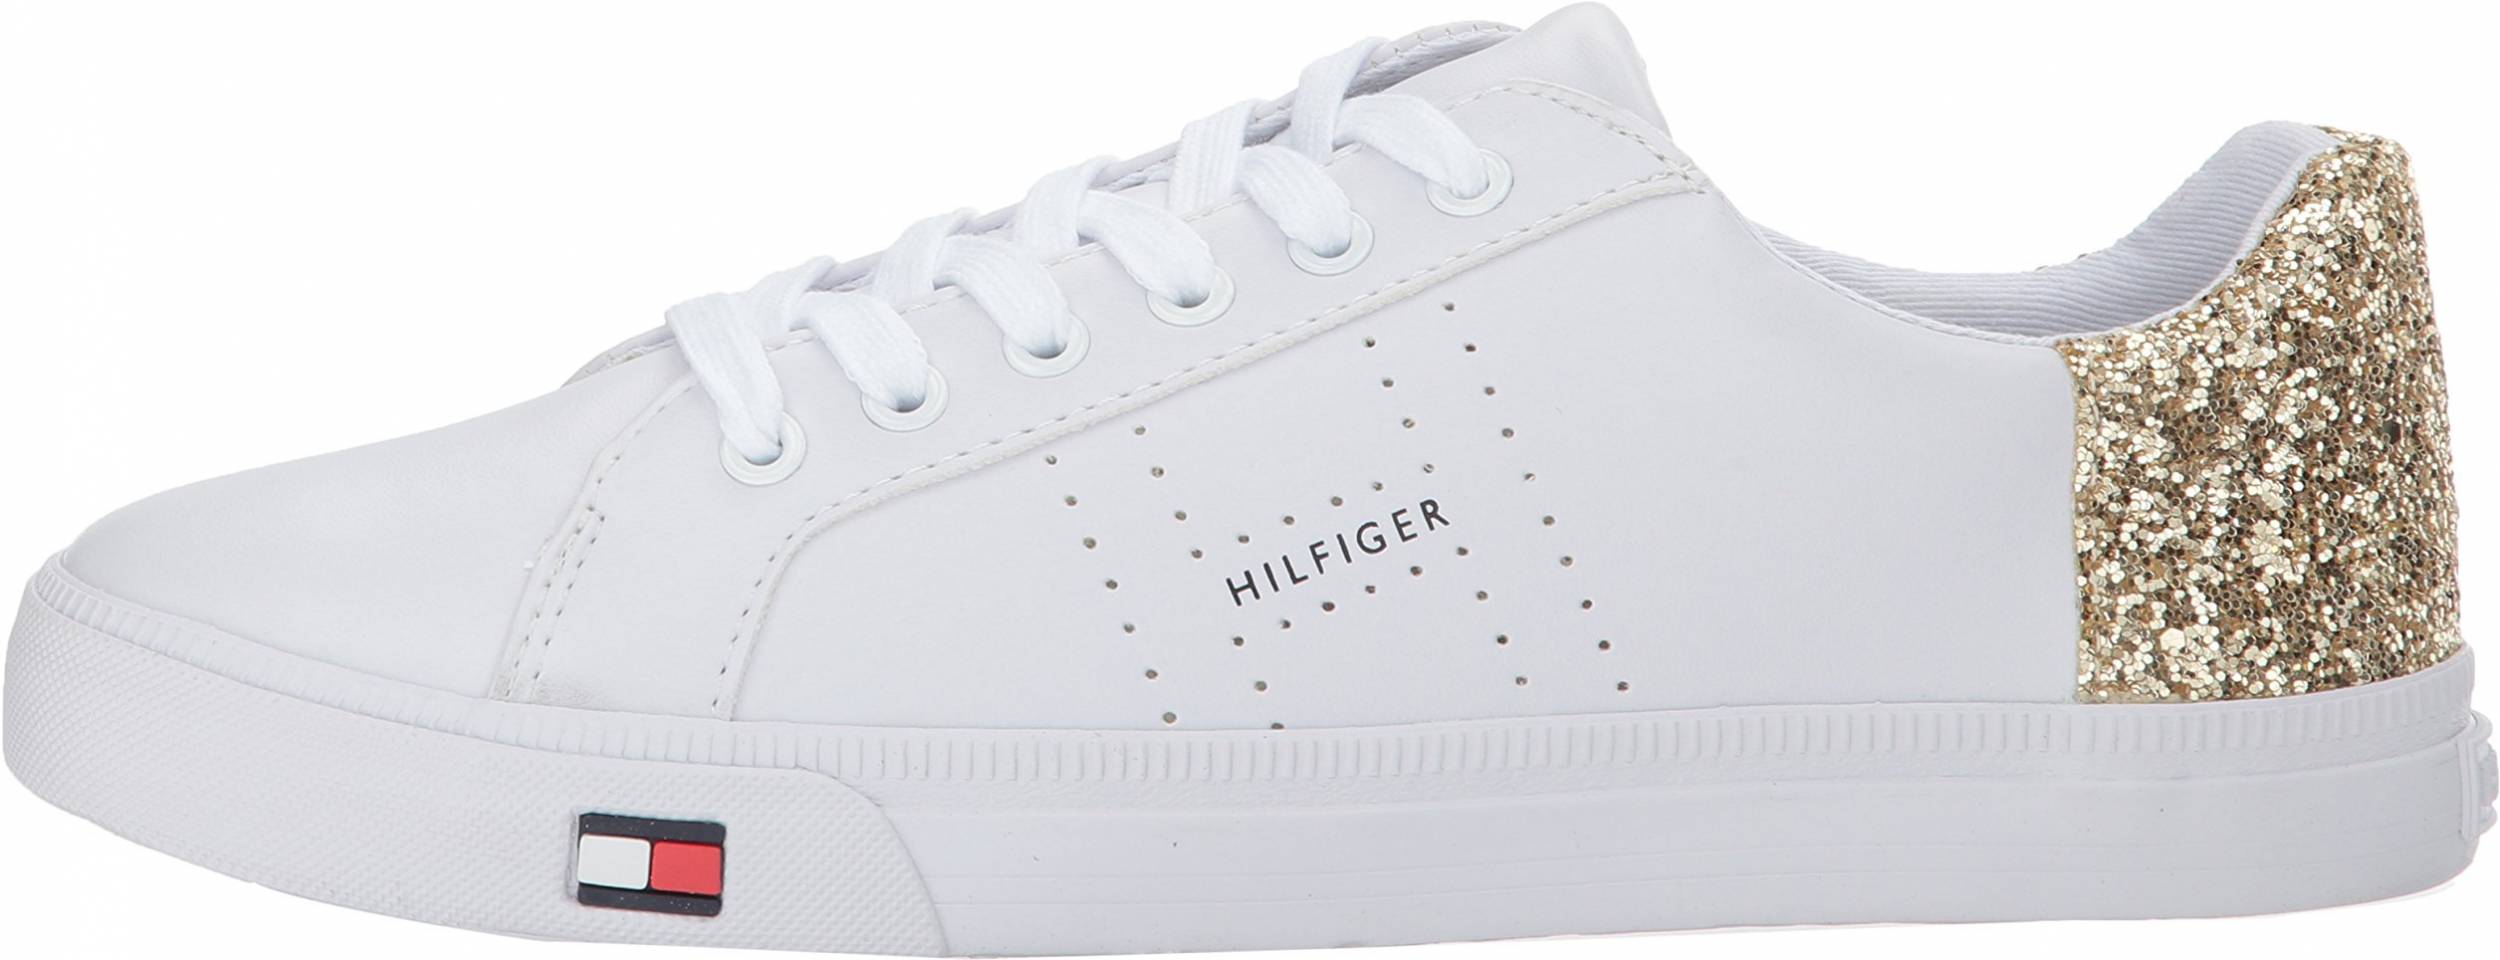 tommy hilfiger sneakers white